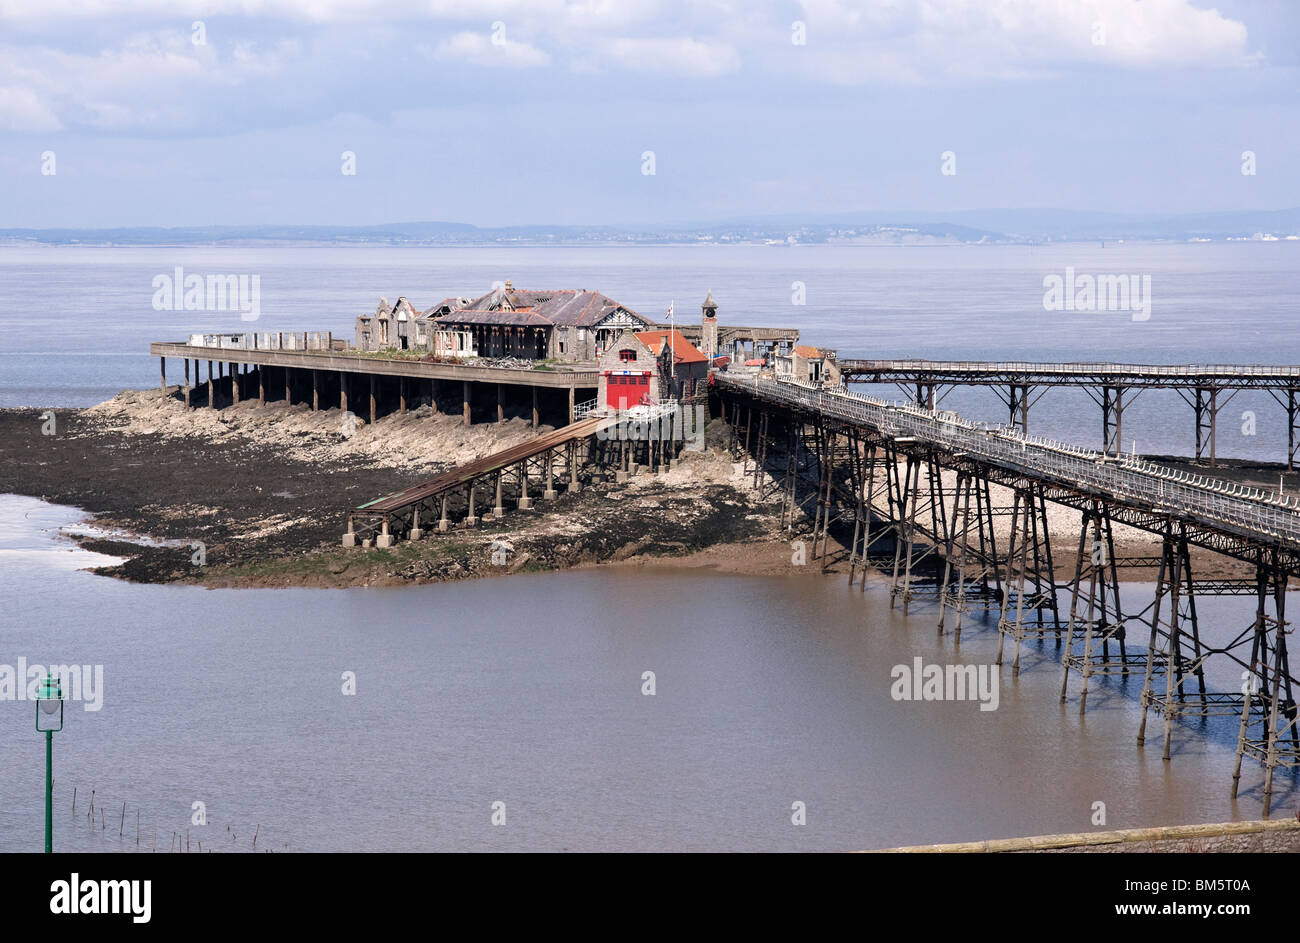 The run down and unsafe Birnbeck Pier at Weston-super-Mare, Somerset UK Stock Photo